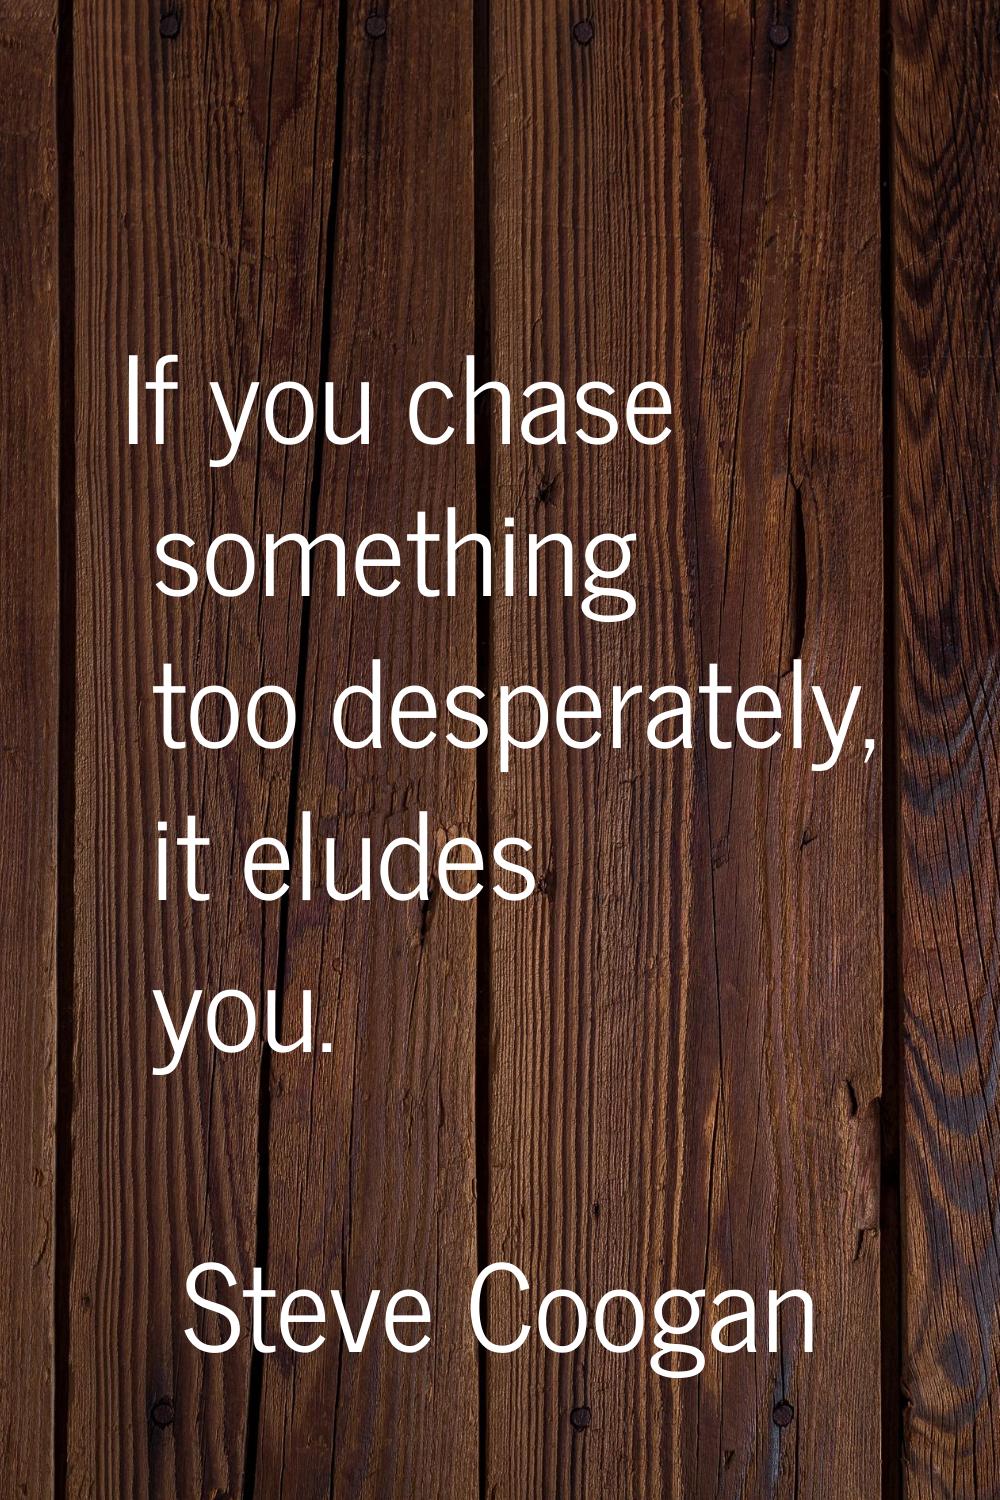 If you chase something too desperately, it eludes you.